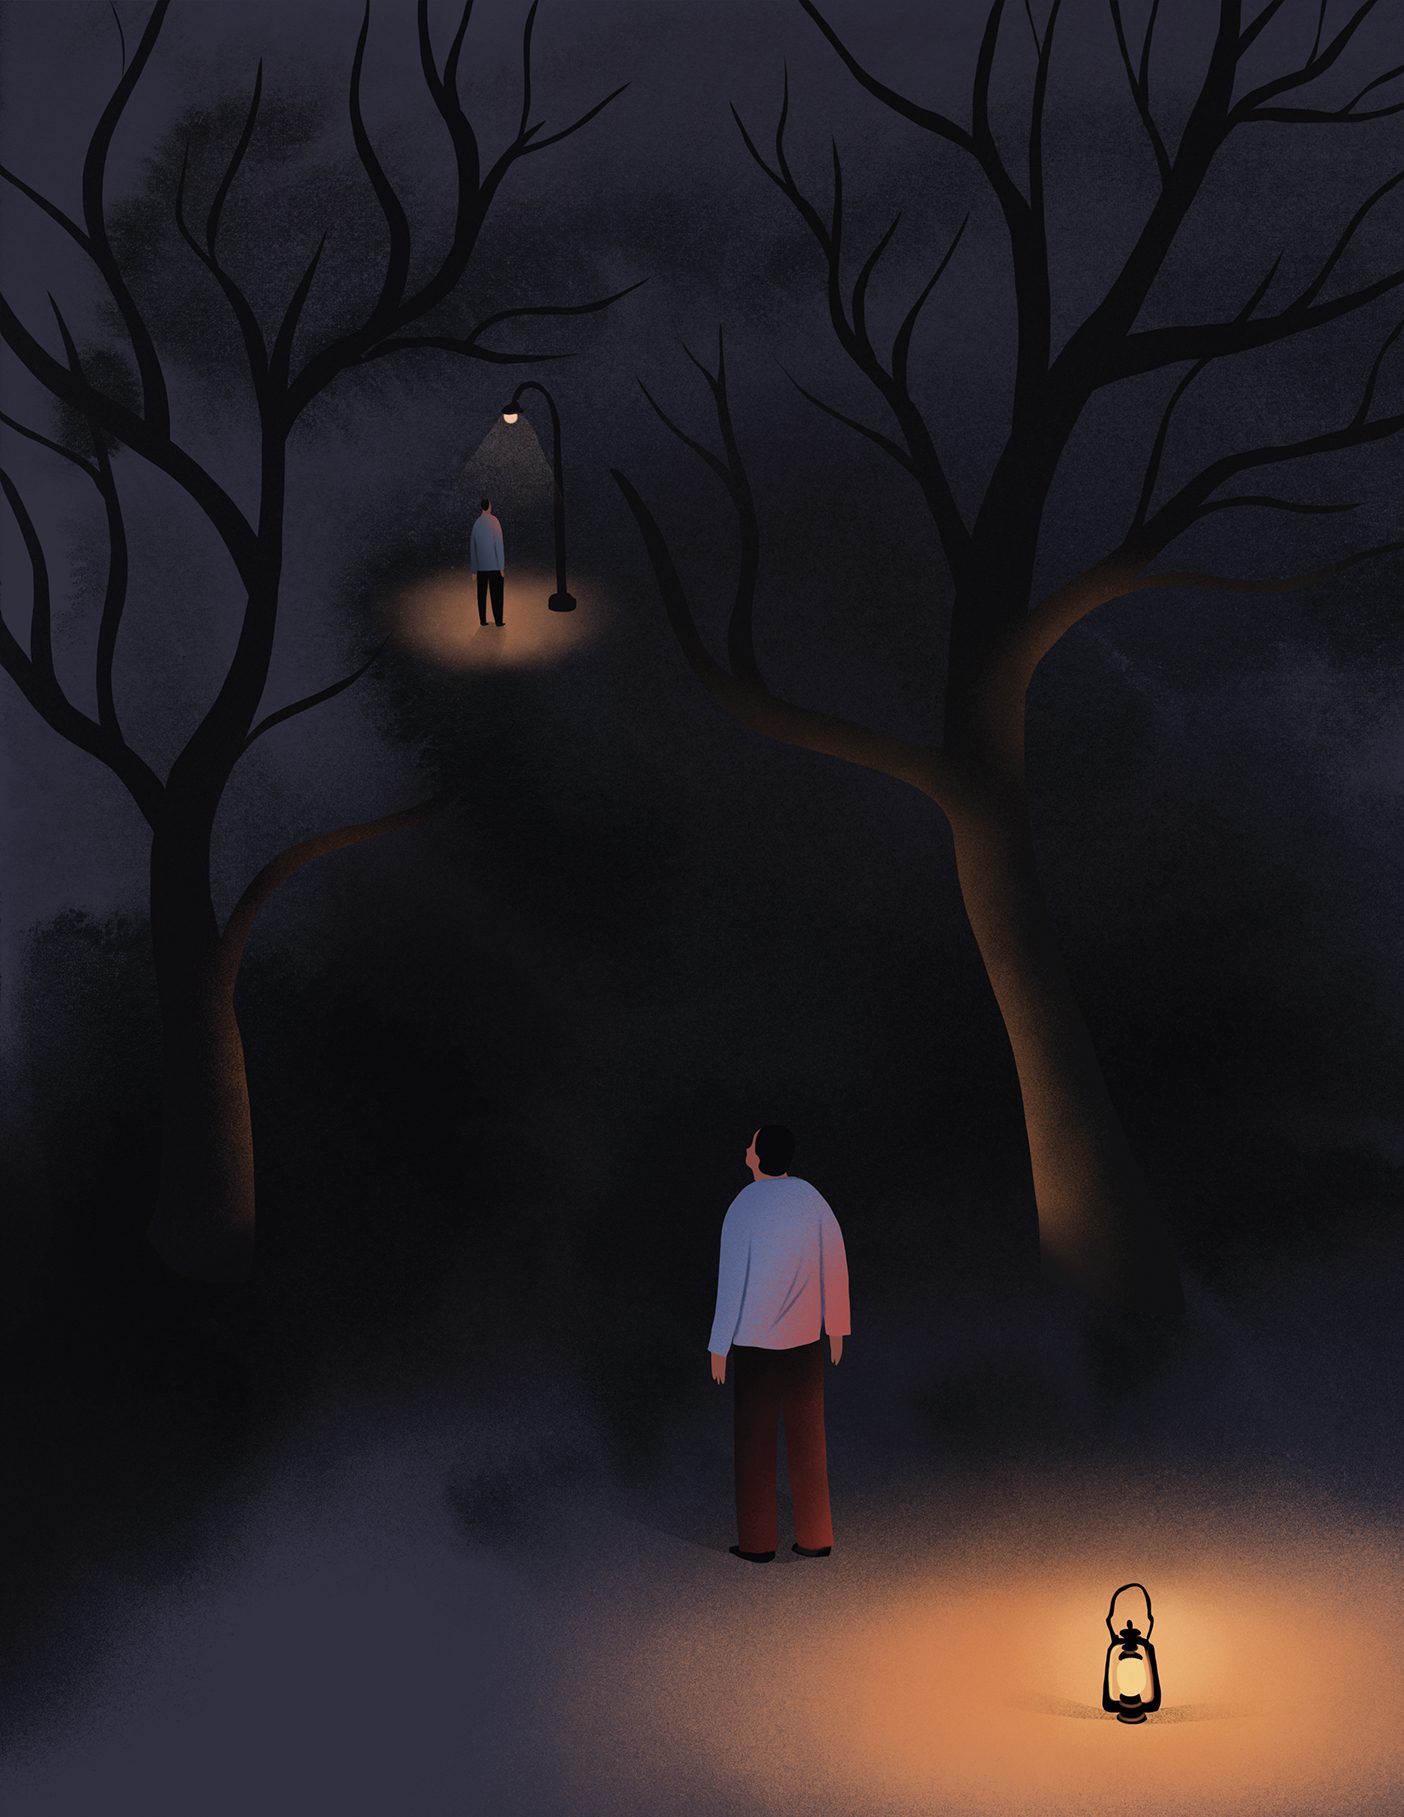 An illustration of a man standing near lamp on a dark night who sees another man in the distance standing underneath a lamp post.